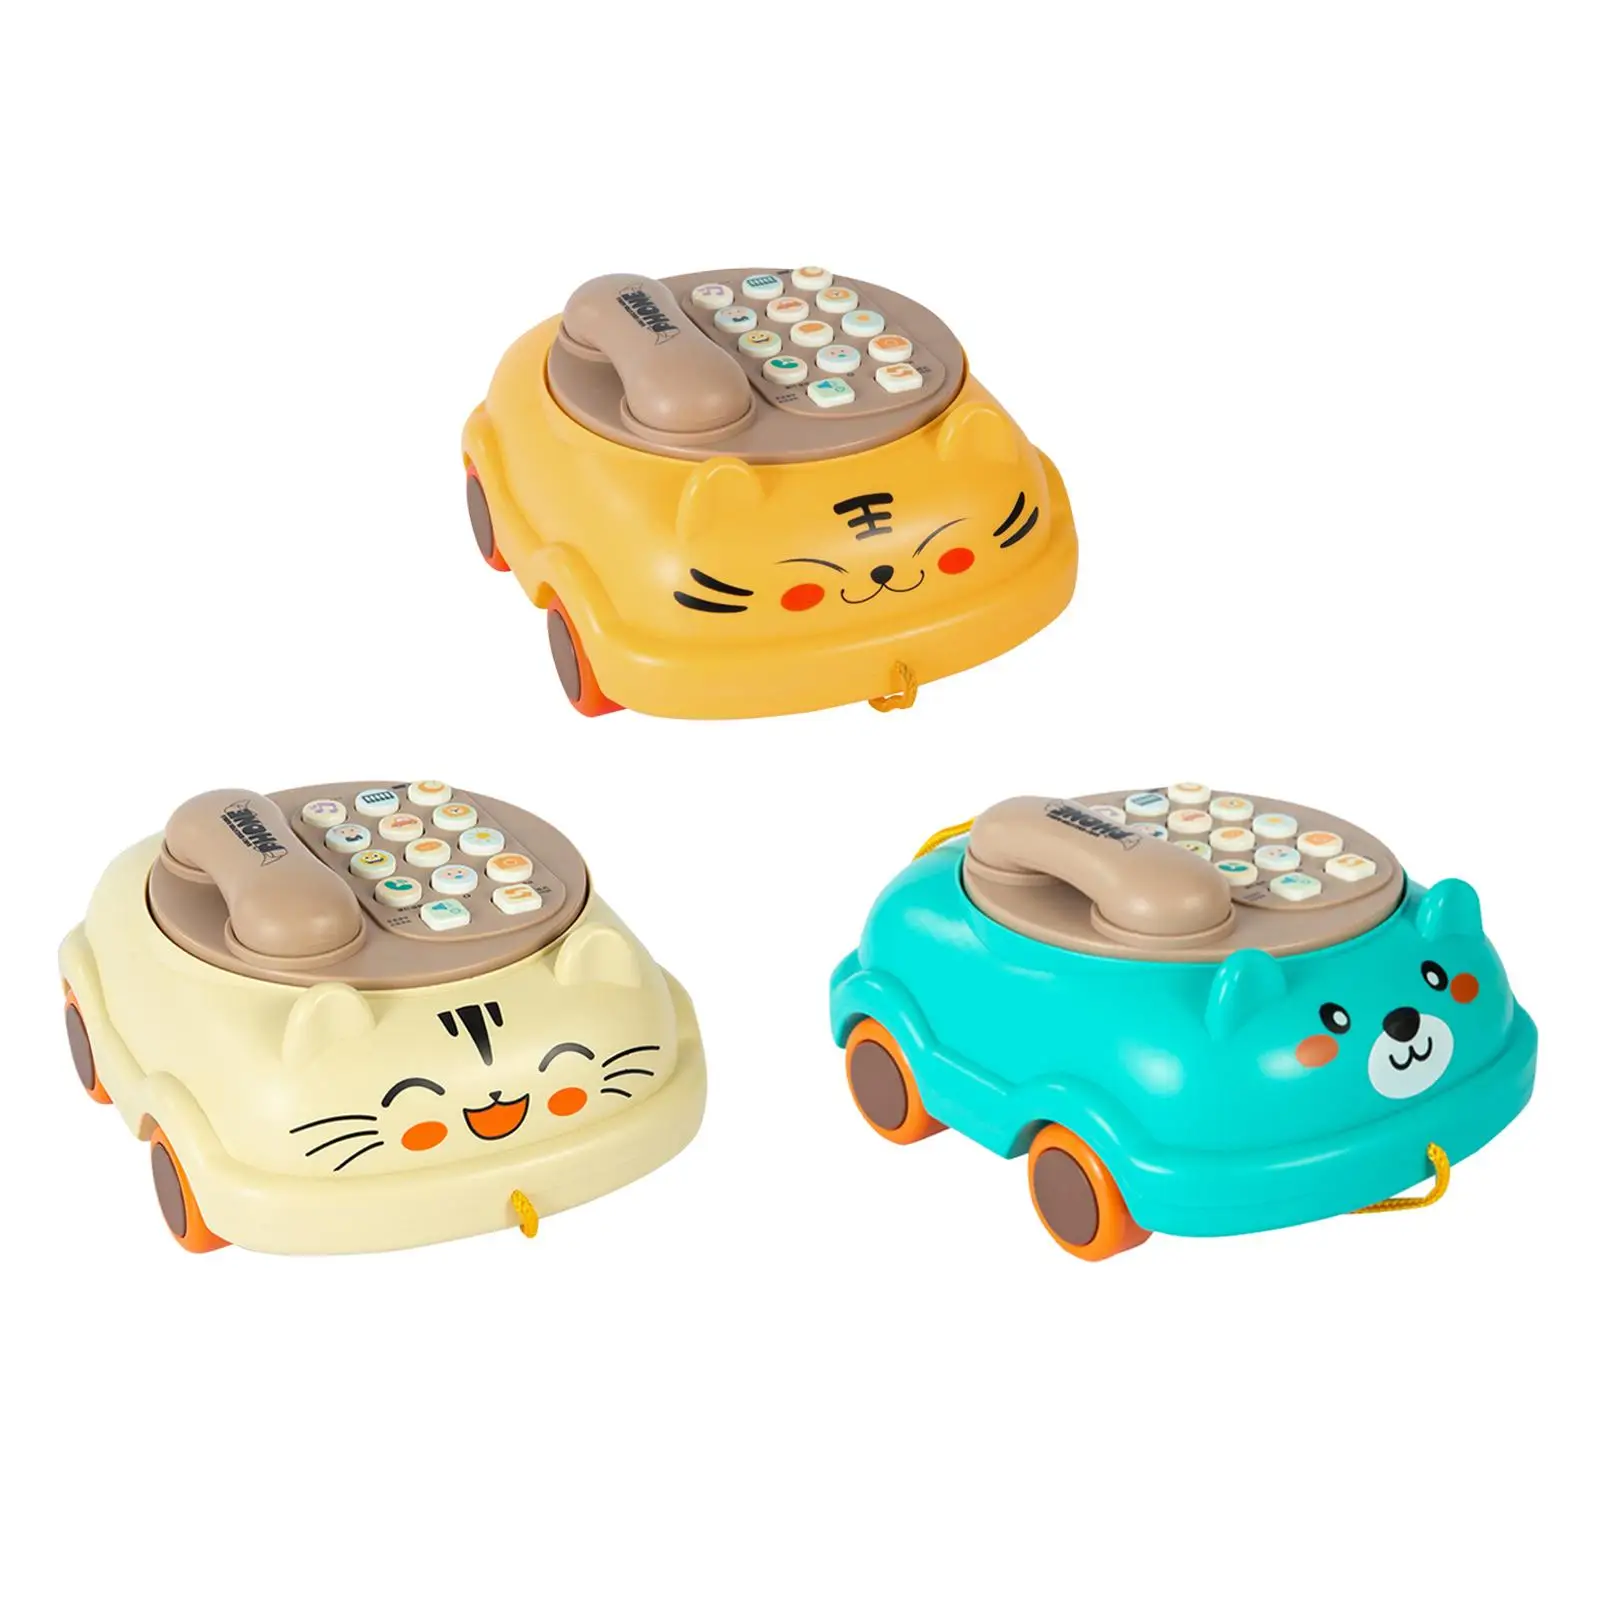 Kid Phone Cognitive Development Toy Lights Piano Early Learning Toy Phones Toy for Preschool Educational Learning Girl